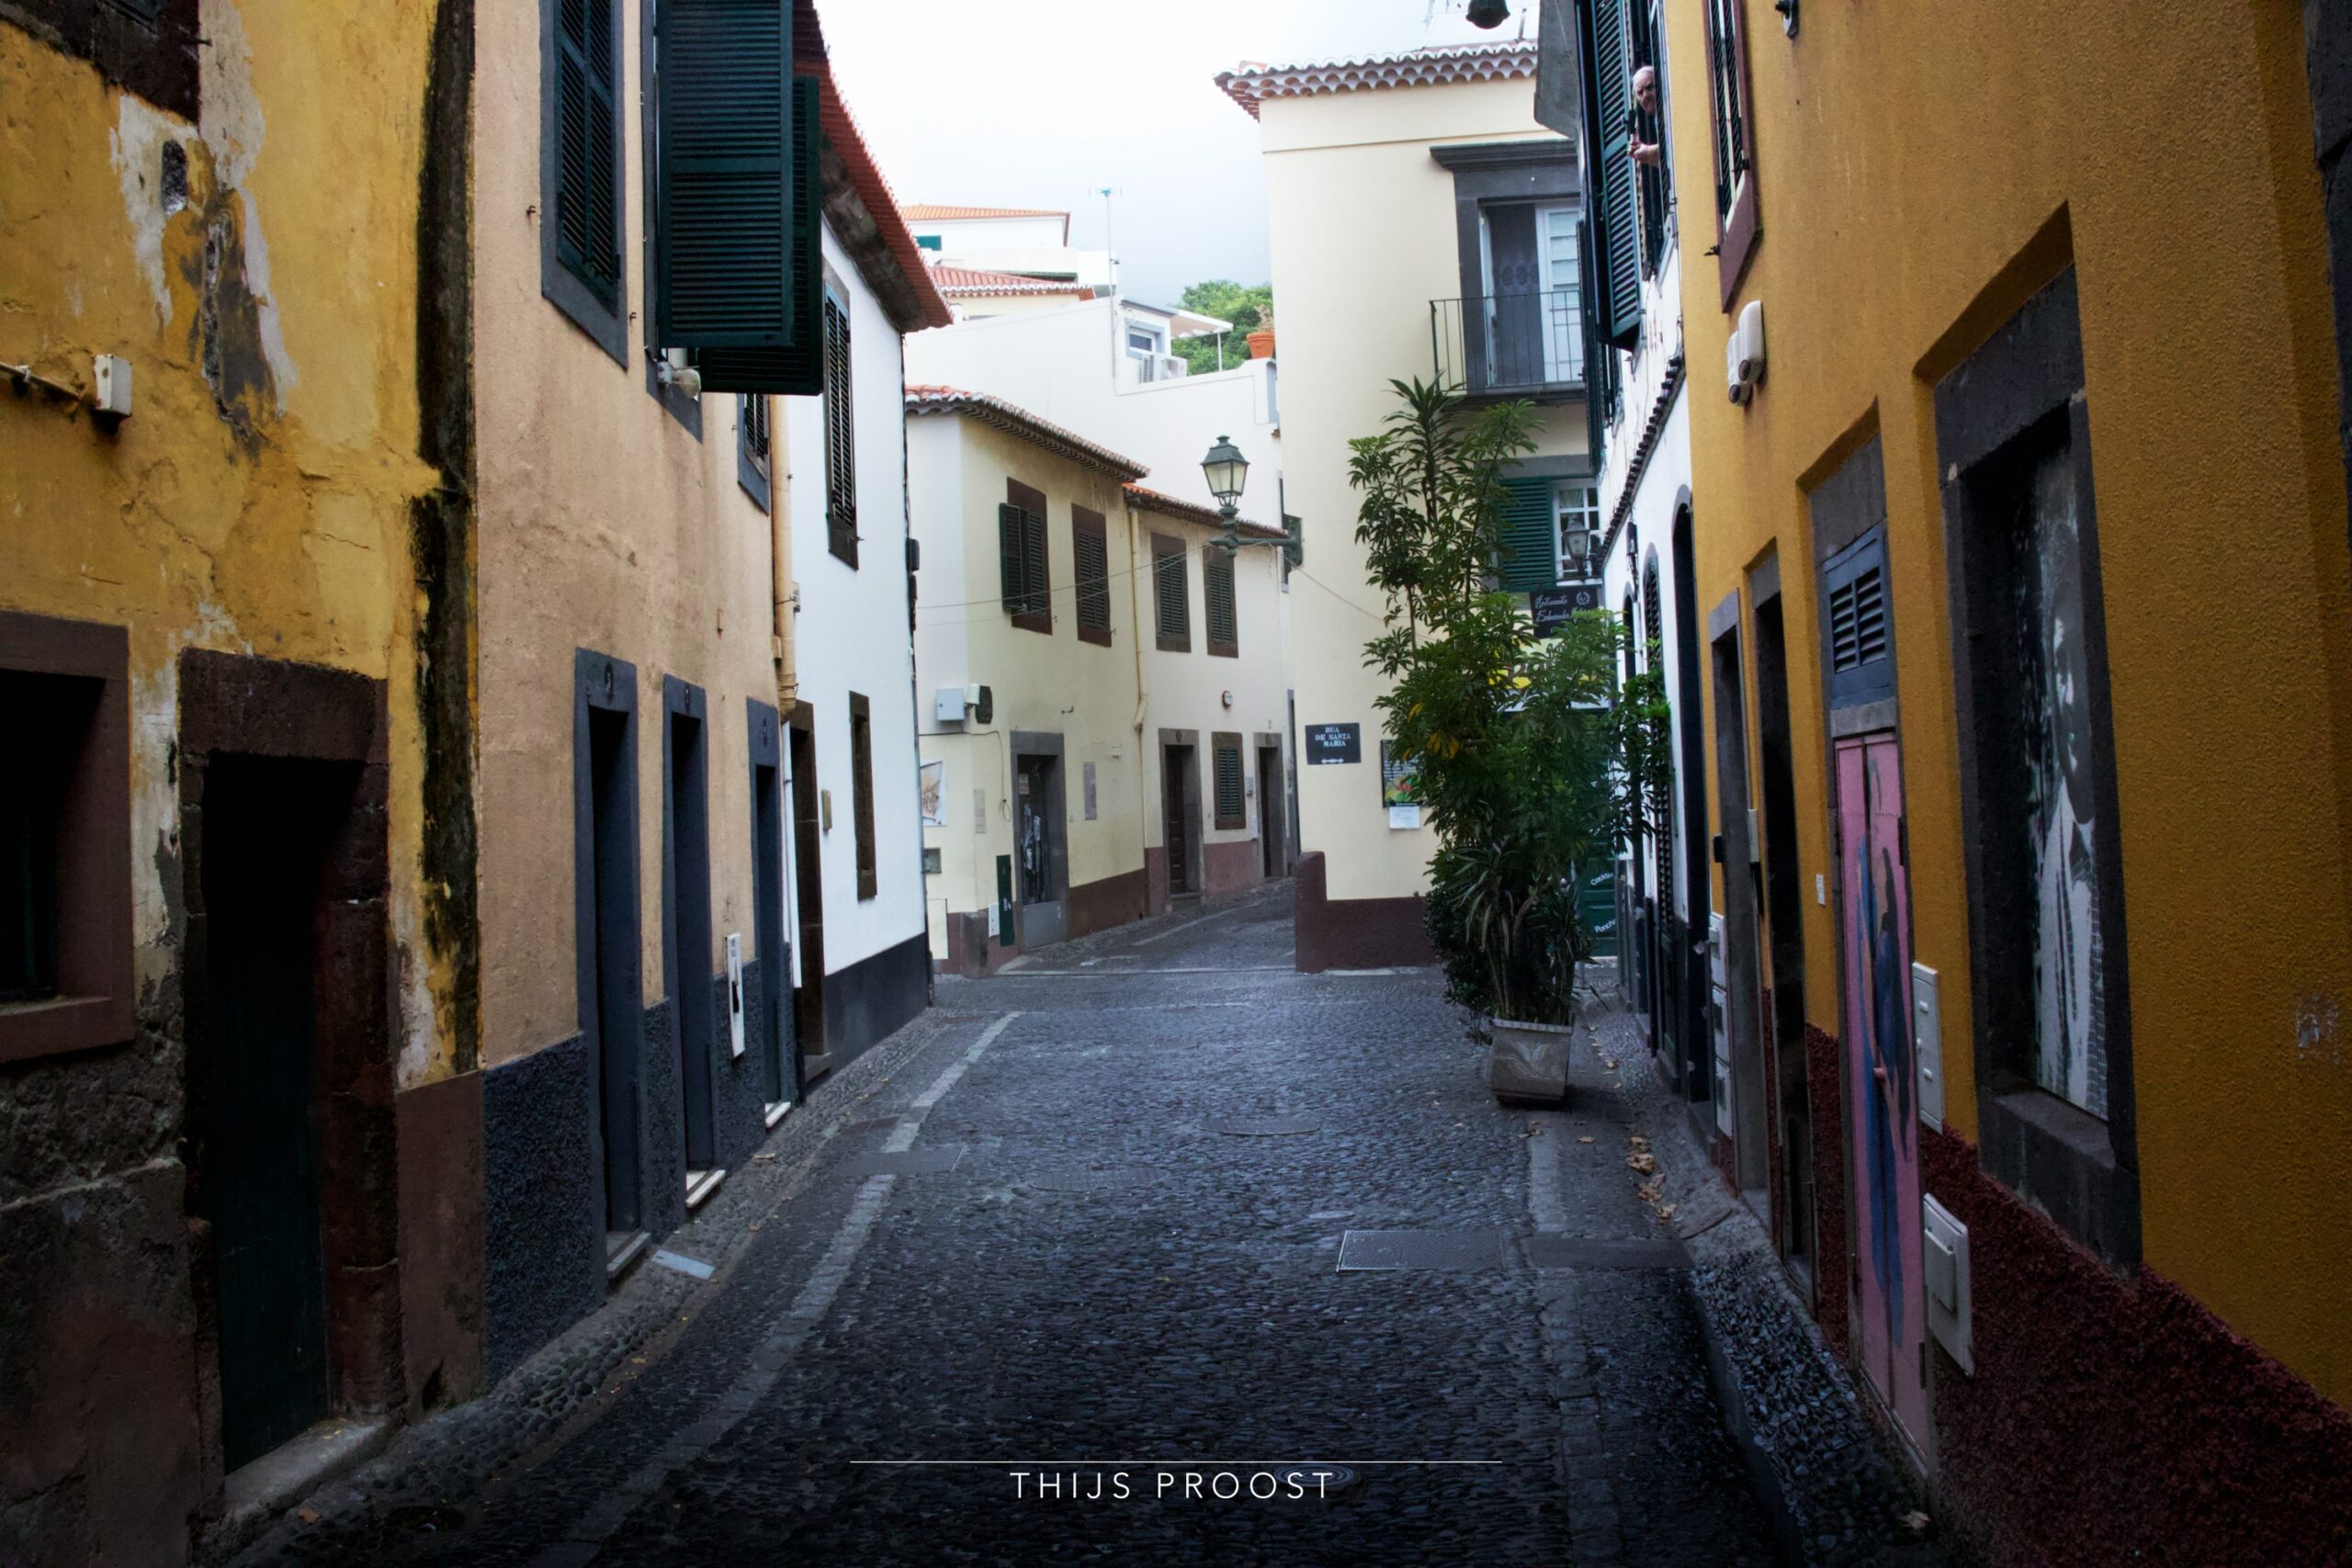 A view of a old street in the center of Funchal Madeira.